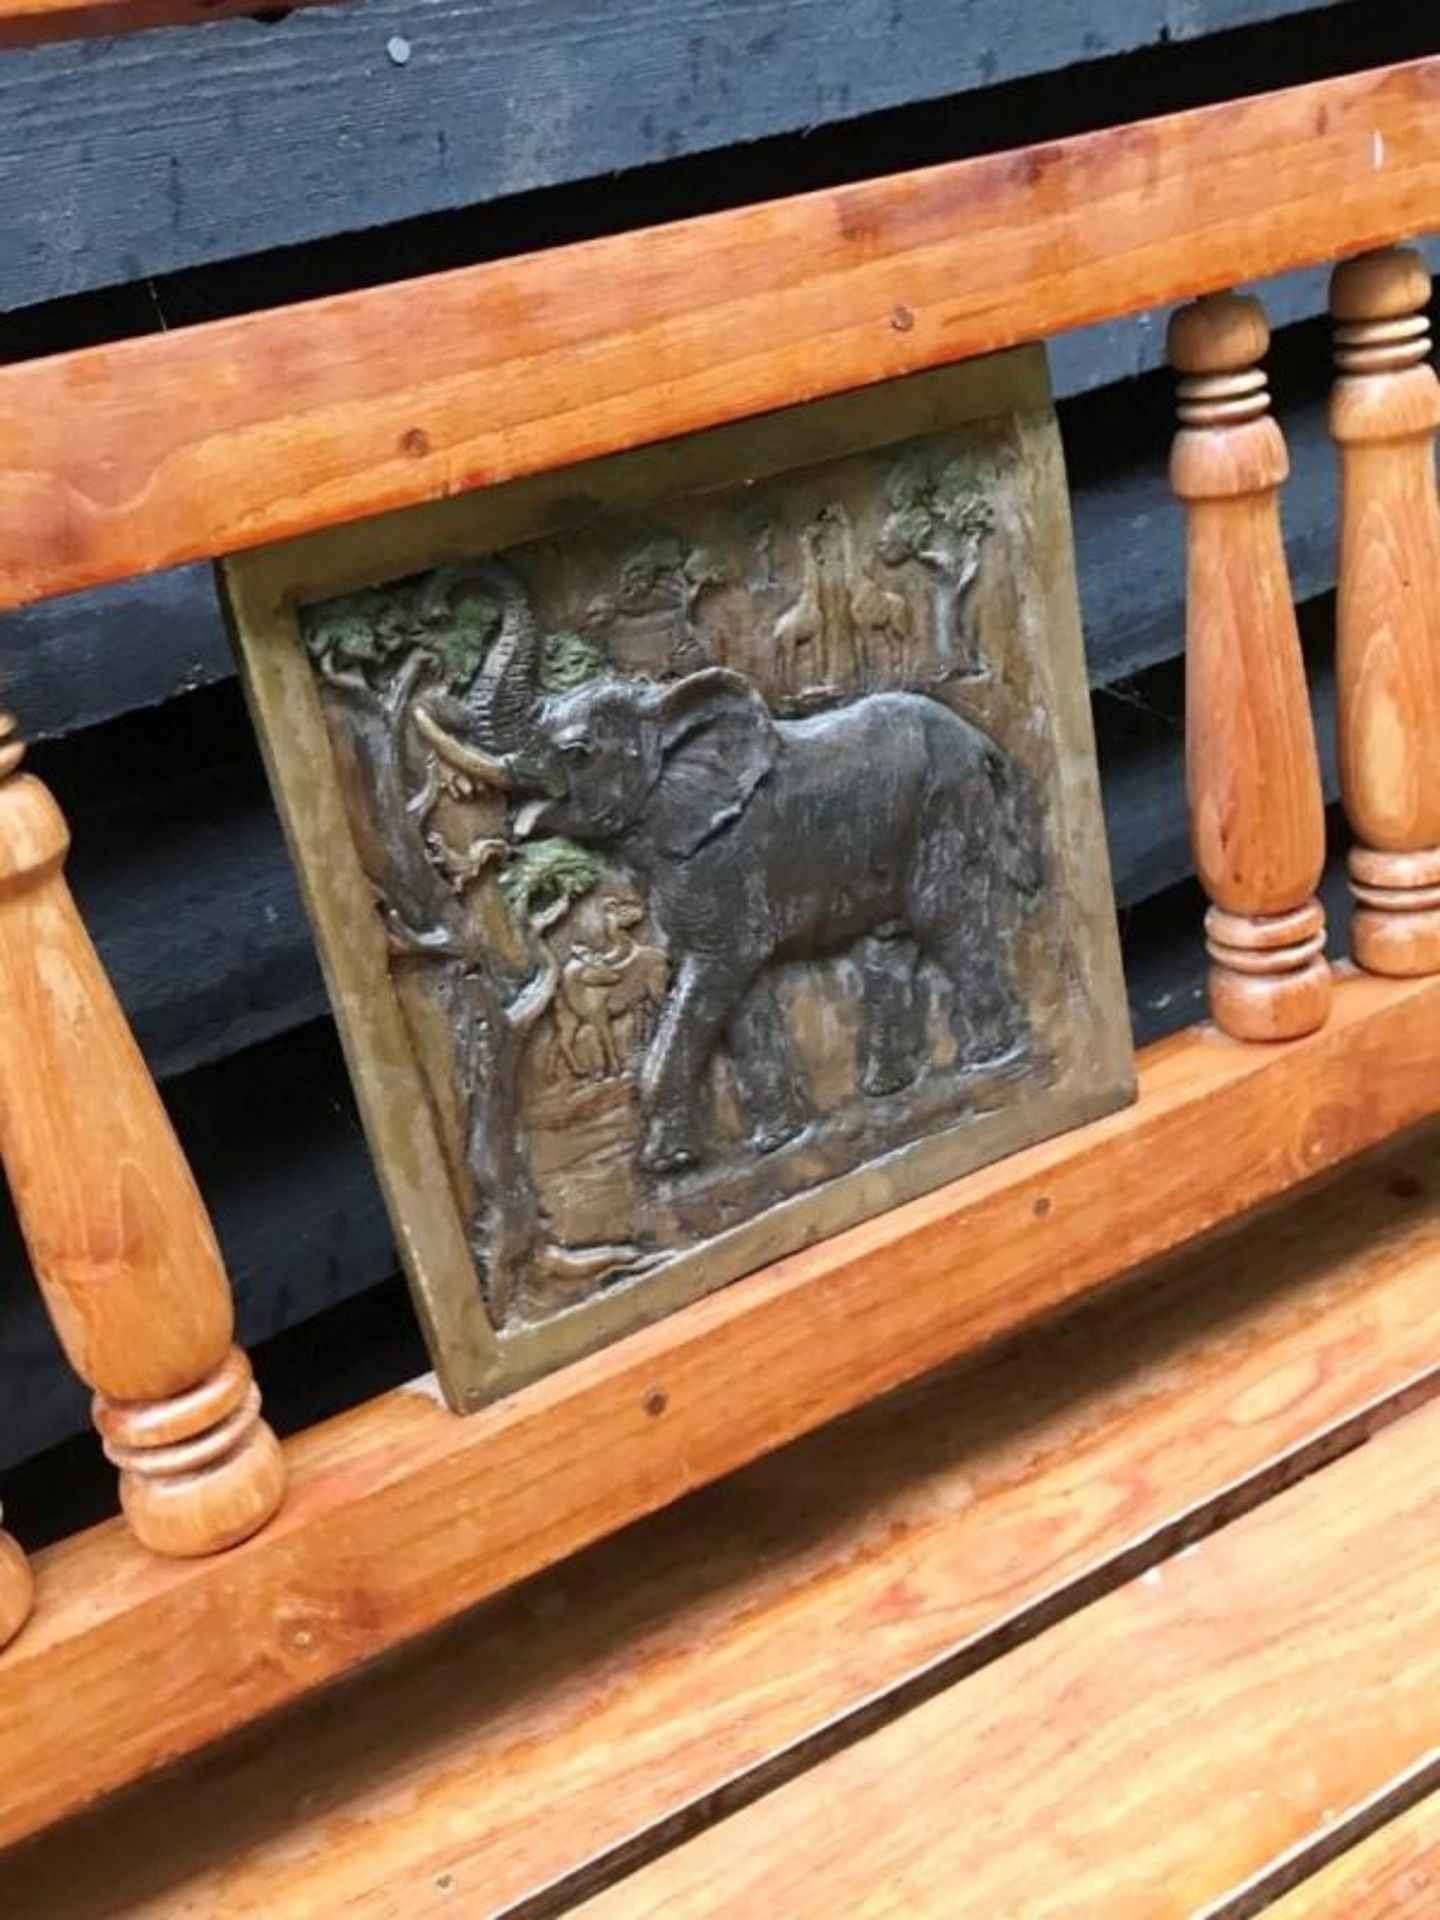 1 x Beautiful and Ornate Indian Teak Wood Bench With Raised Bronze Elephant Plaque Inserts - - Image 9 of 10